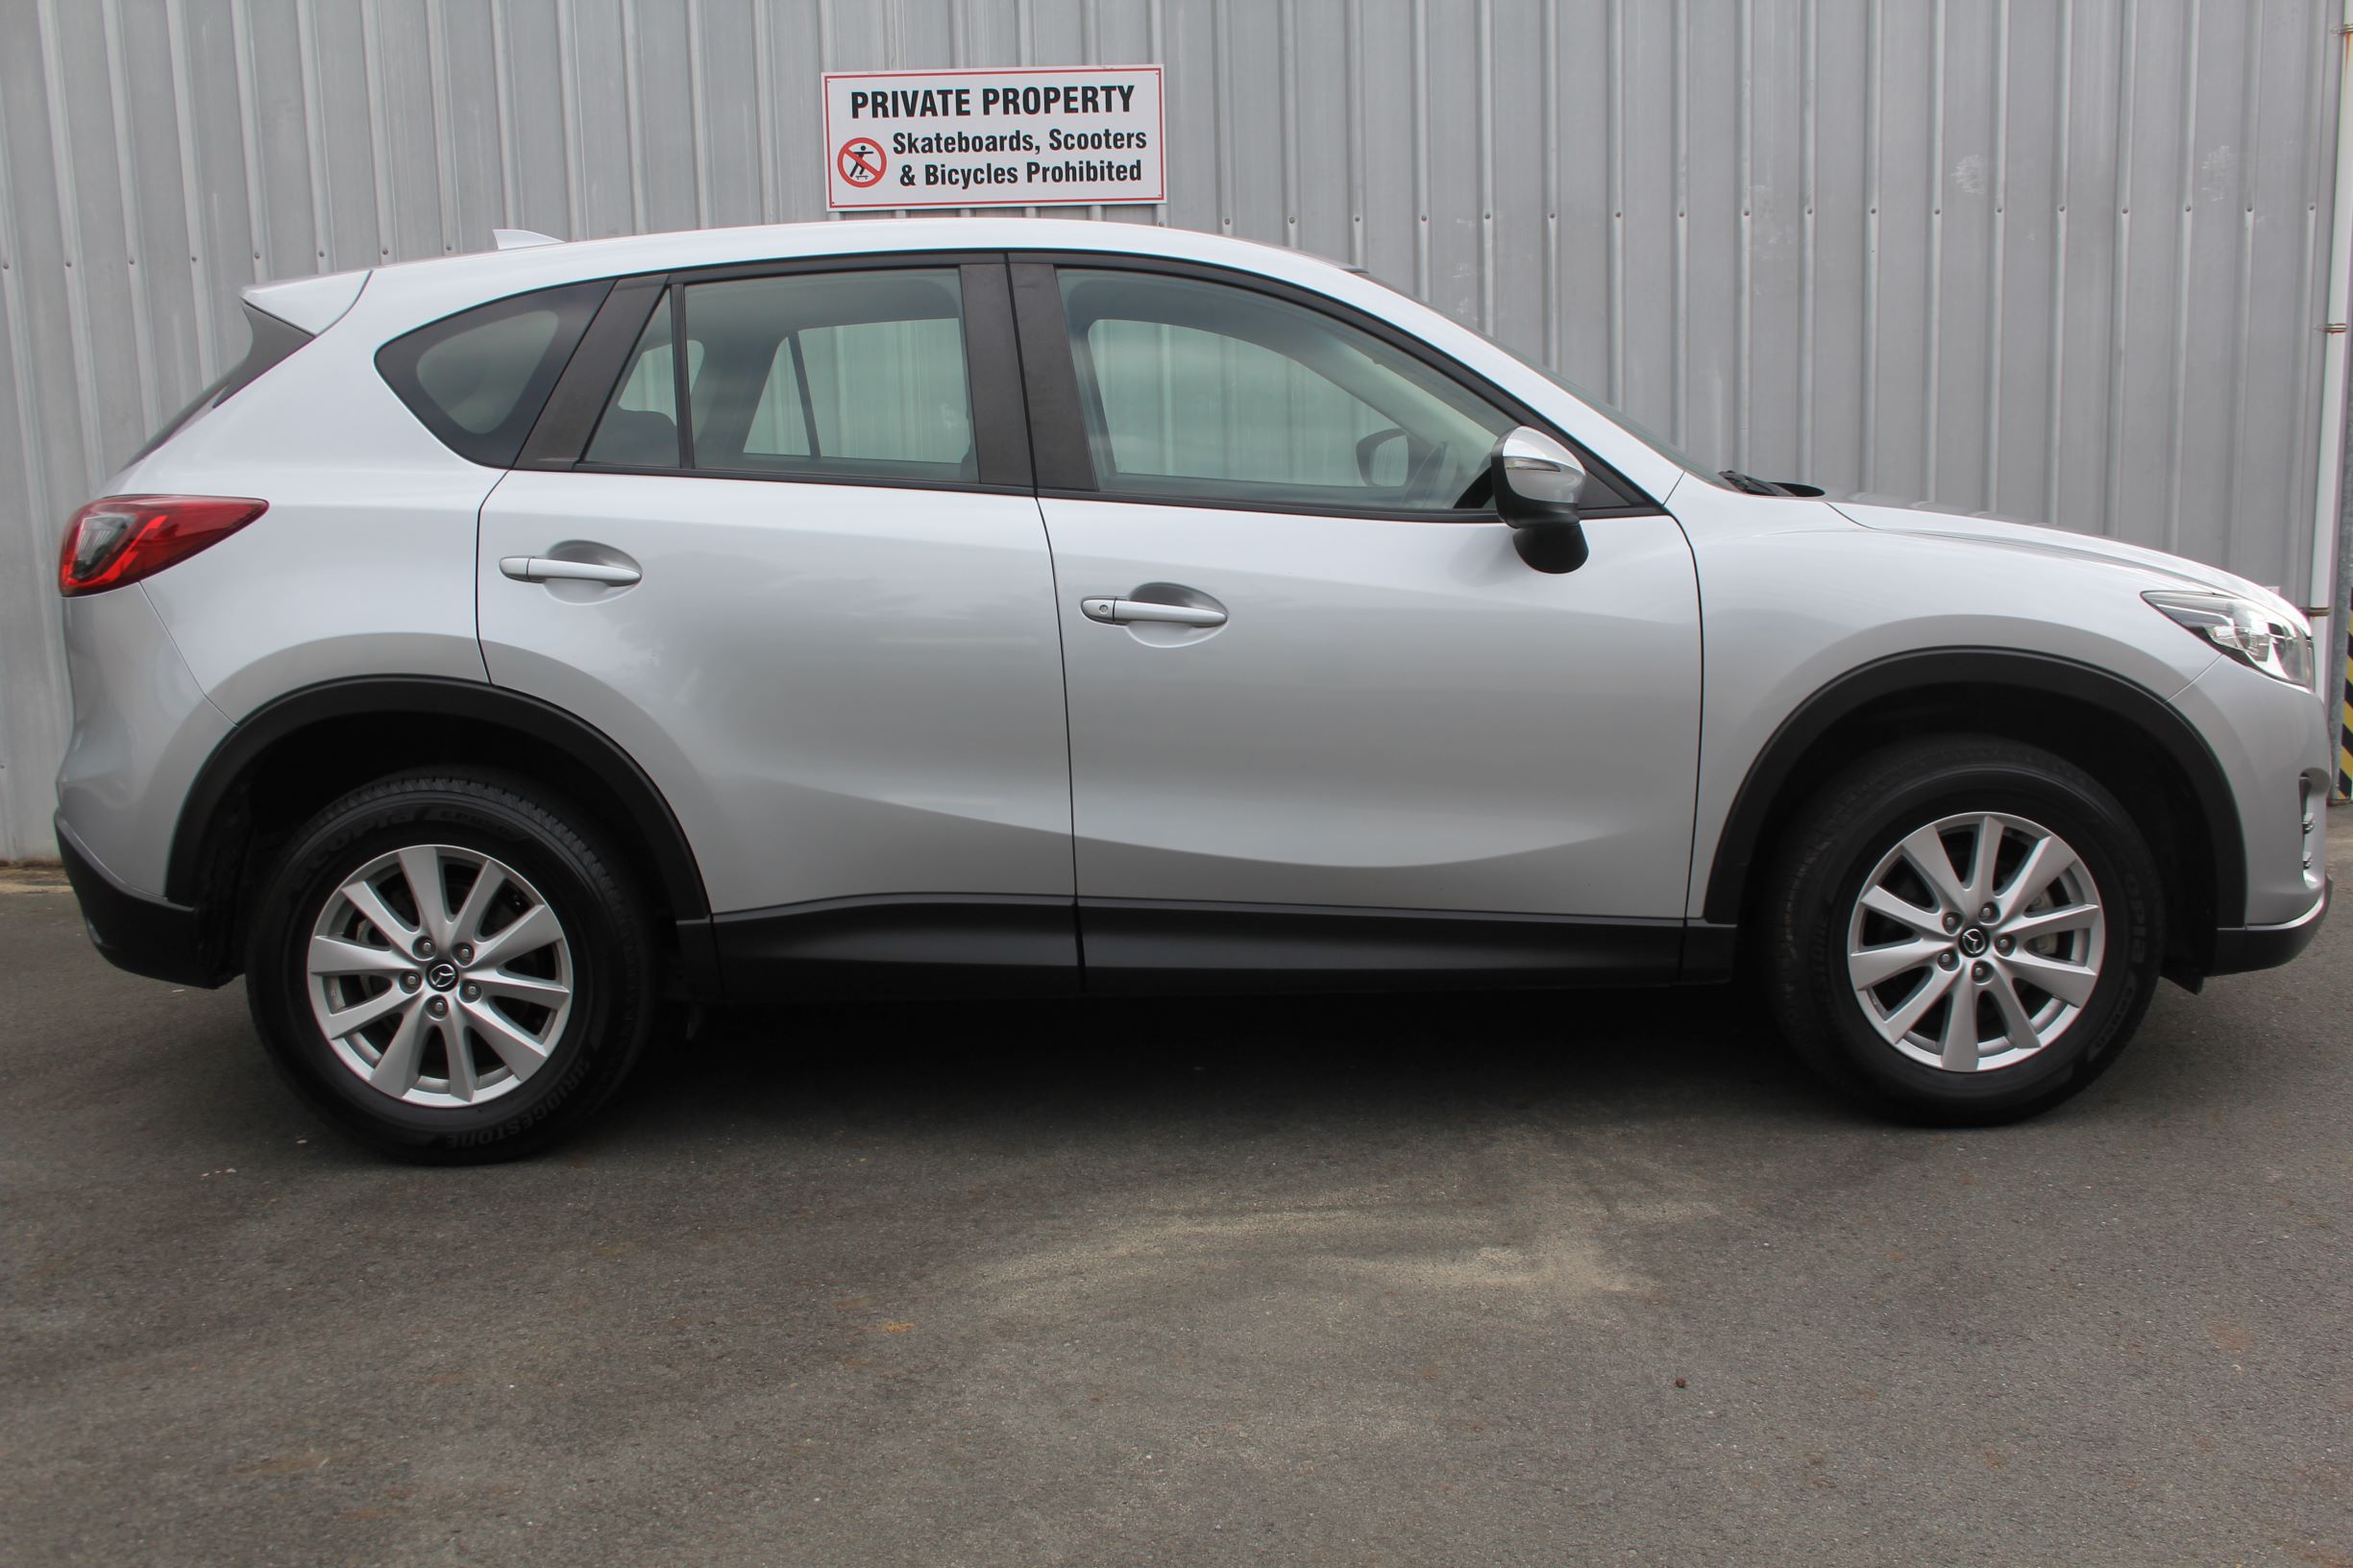 Mazda CX-5 2016 for sale in Auckland